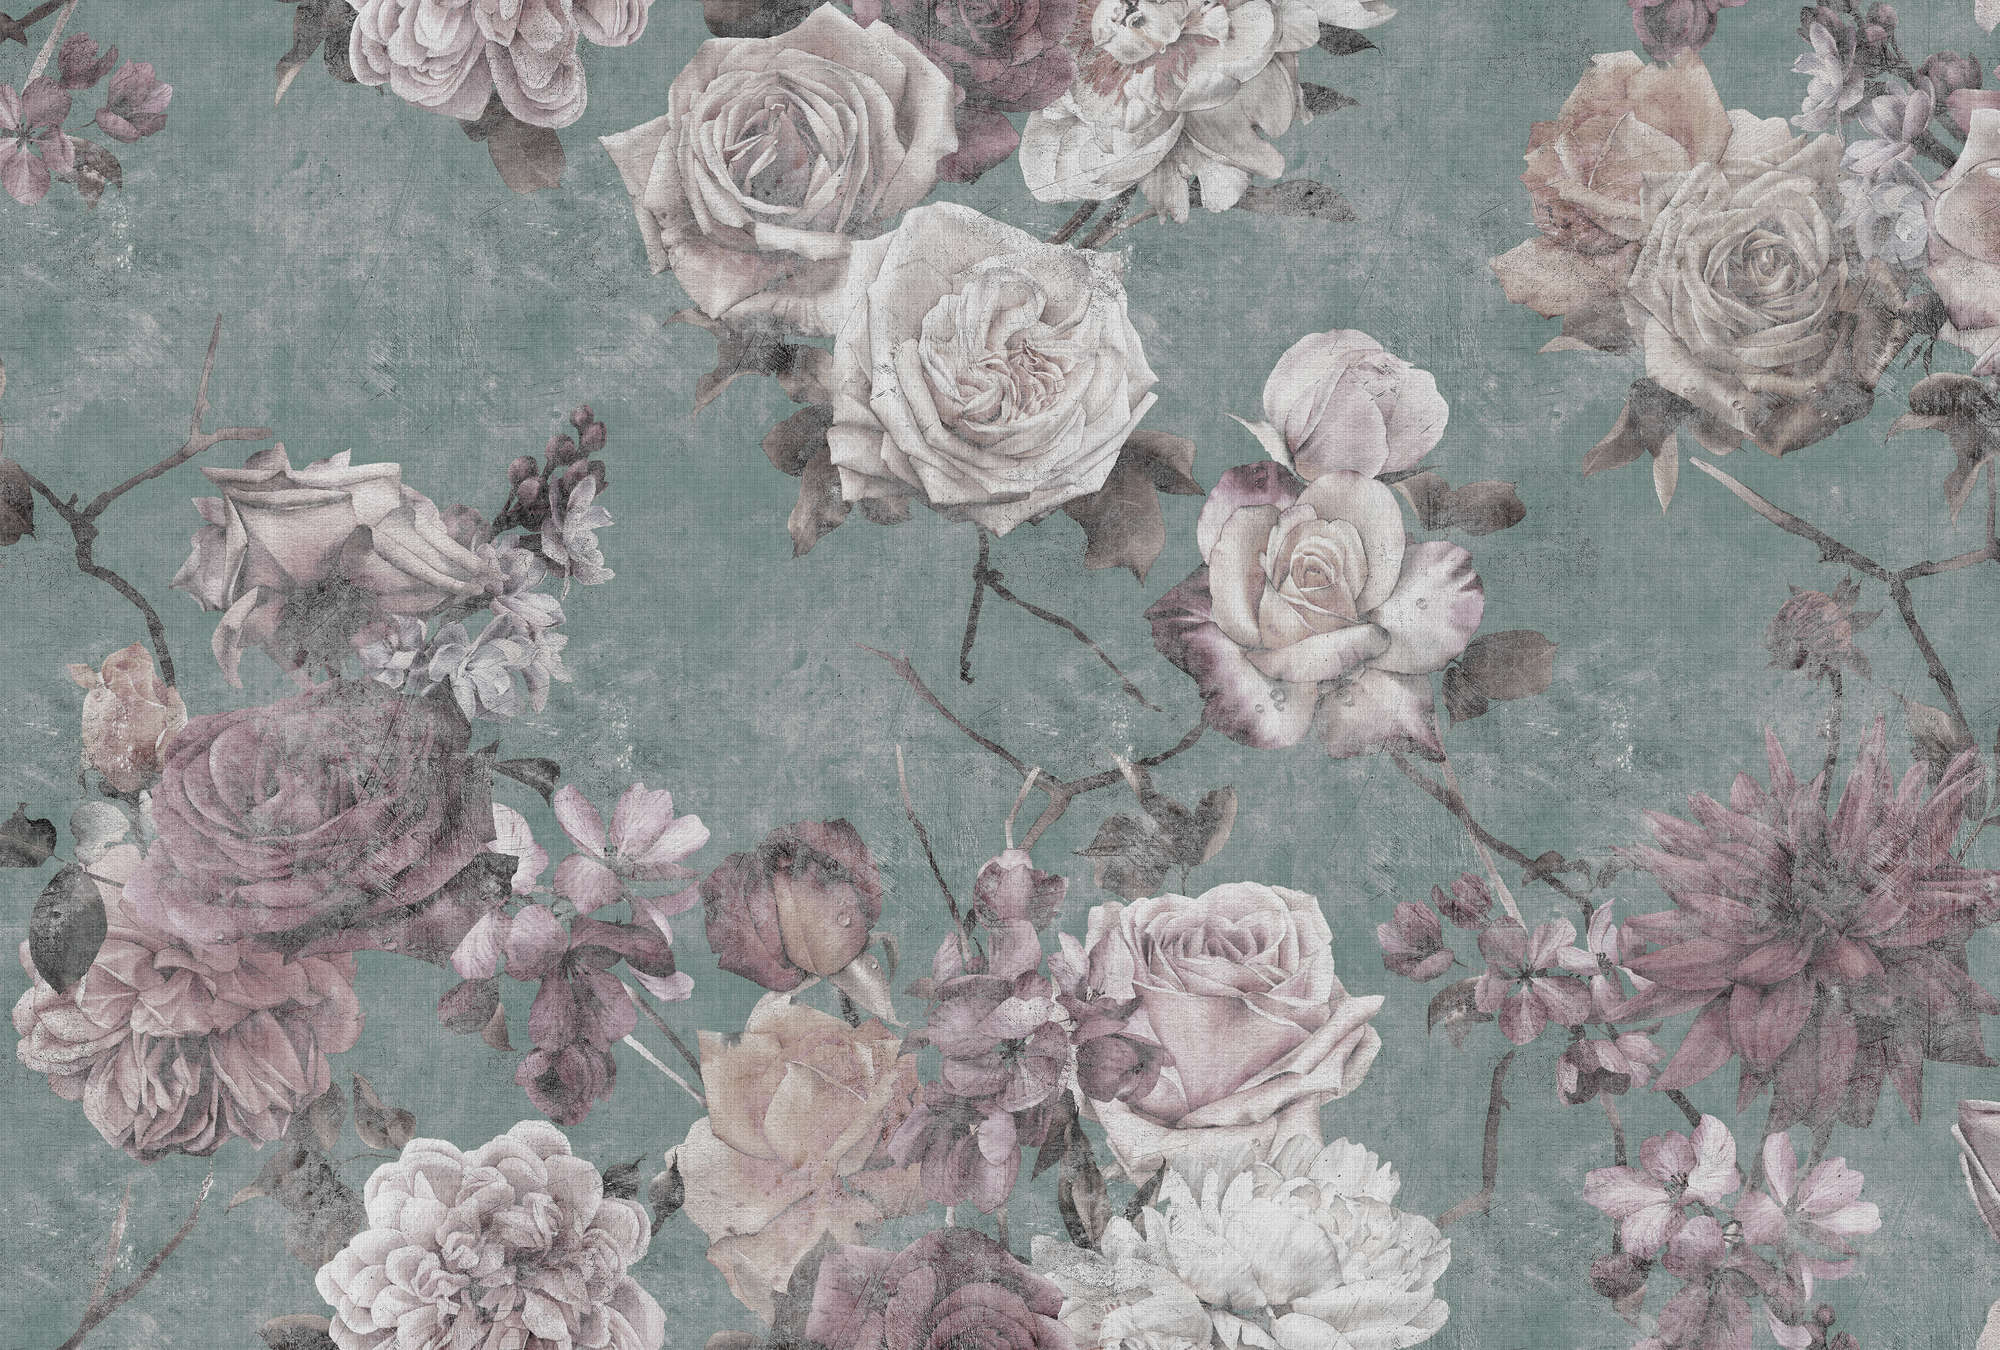             Sleeping Beauty 2 - Vintage Style Rose Blossoms Wallpaper - Natural Linen Texture - Pink, Turquoise | Pearl Smooth Vliesbehang
        